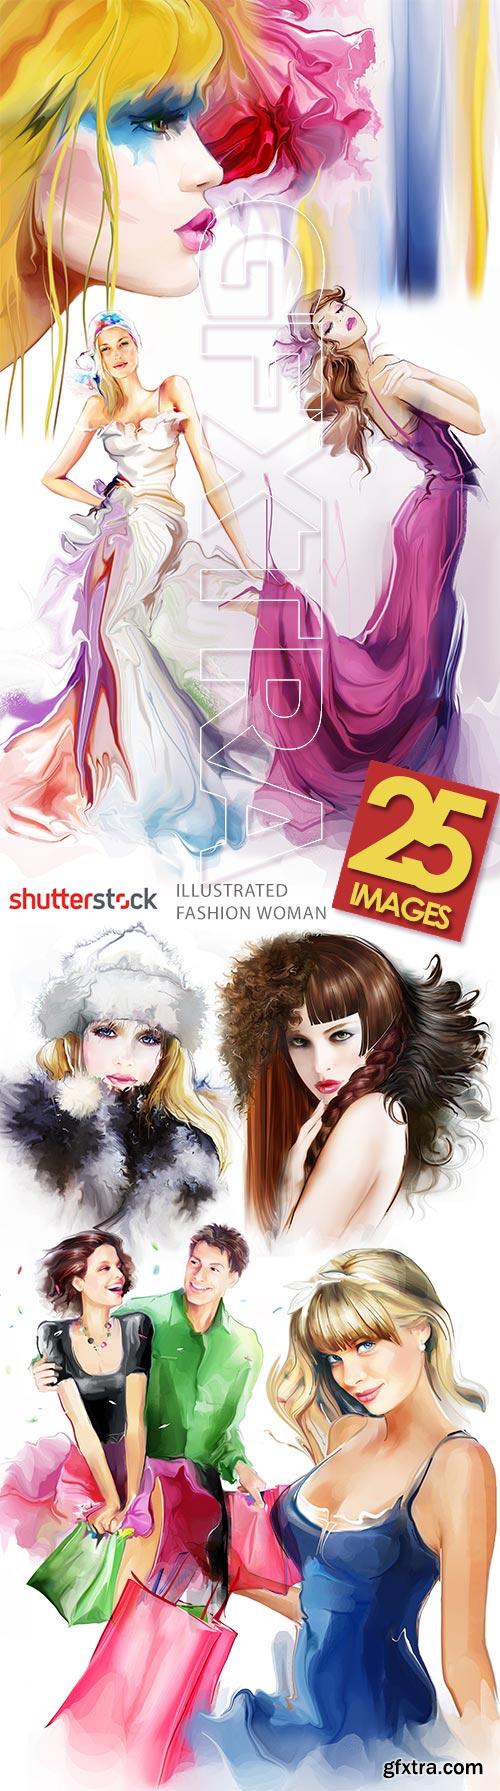 Illustrated Fashion Woman I, 25xJPG Paintings